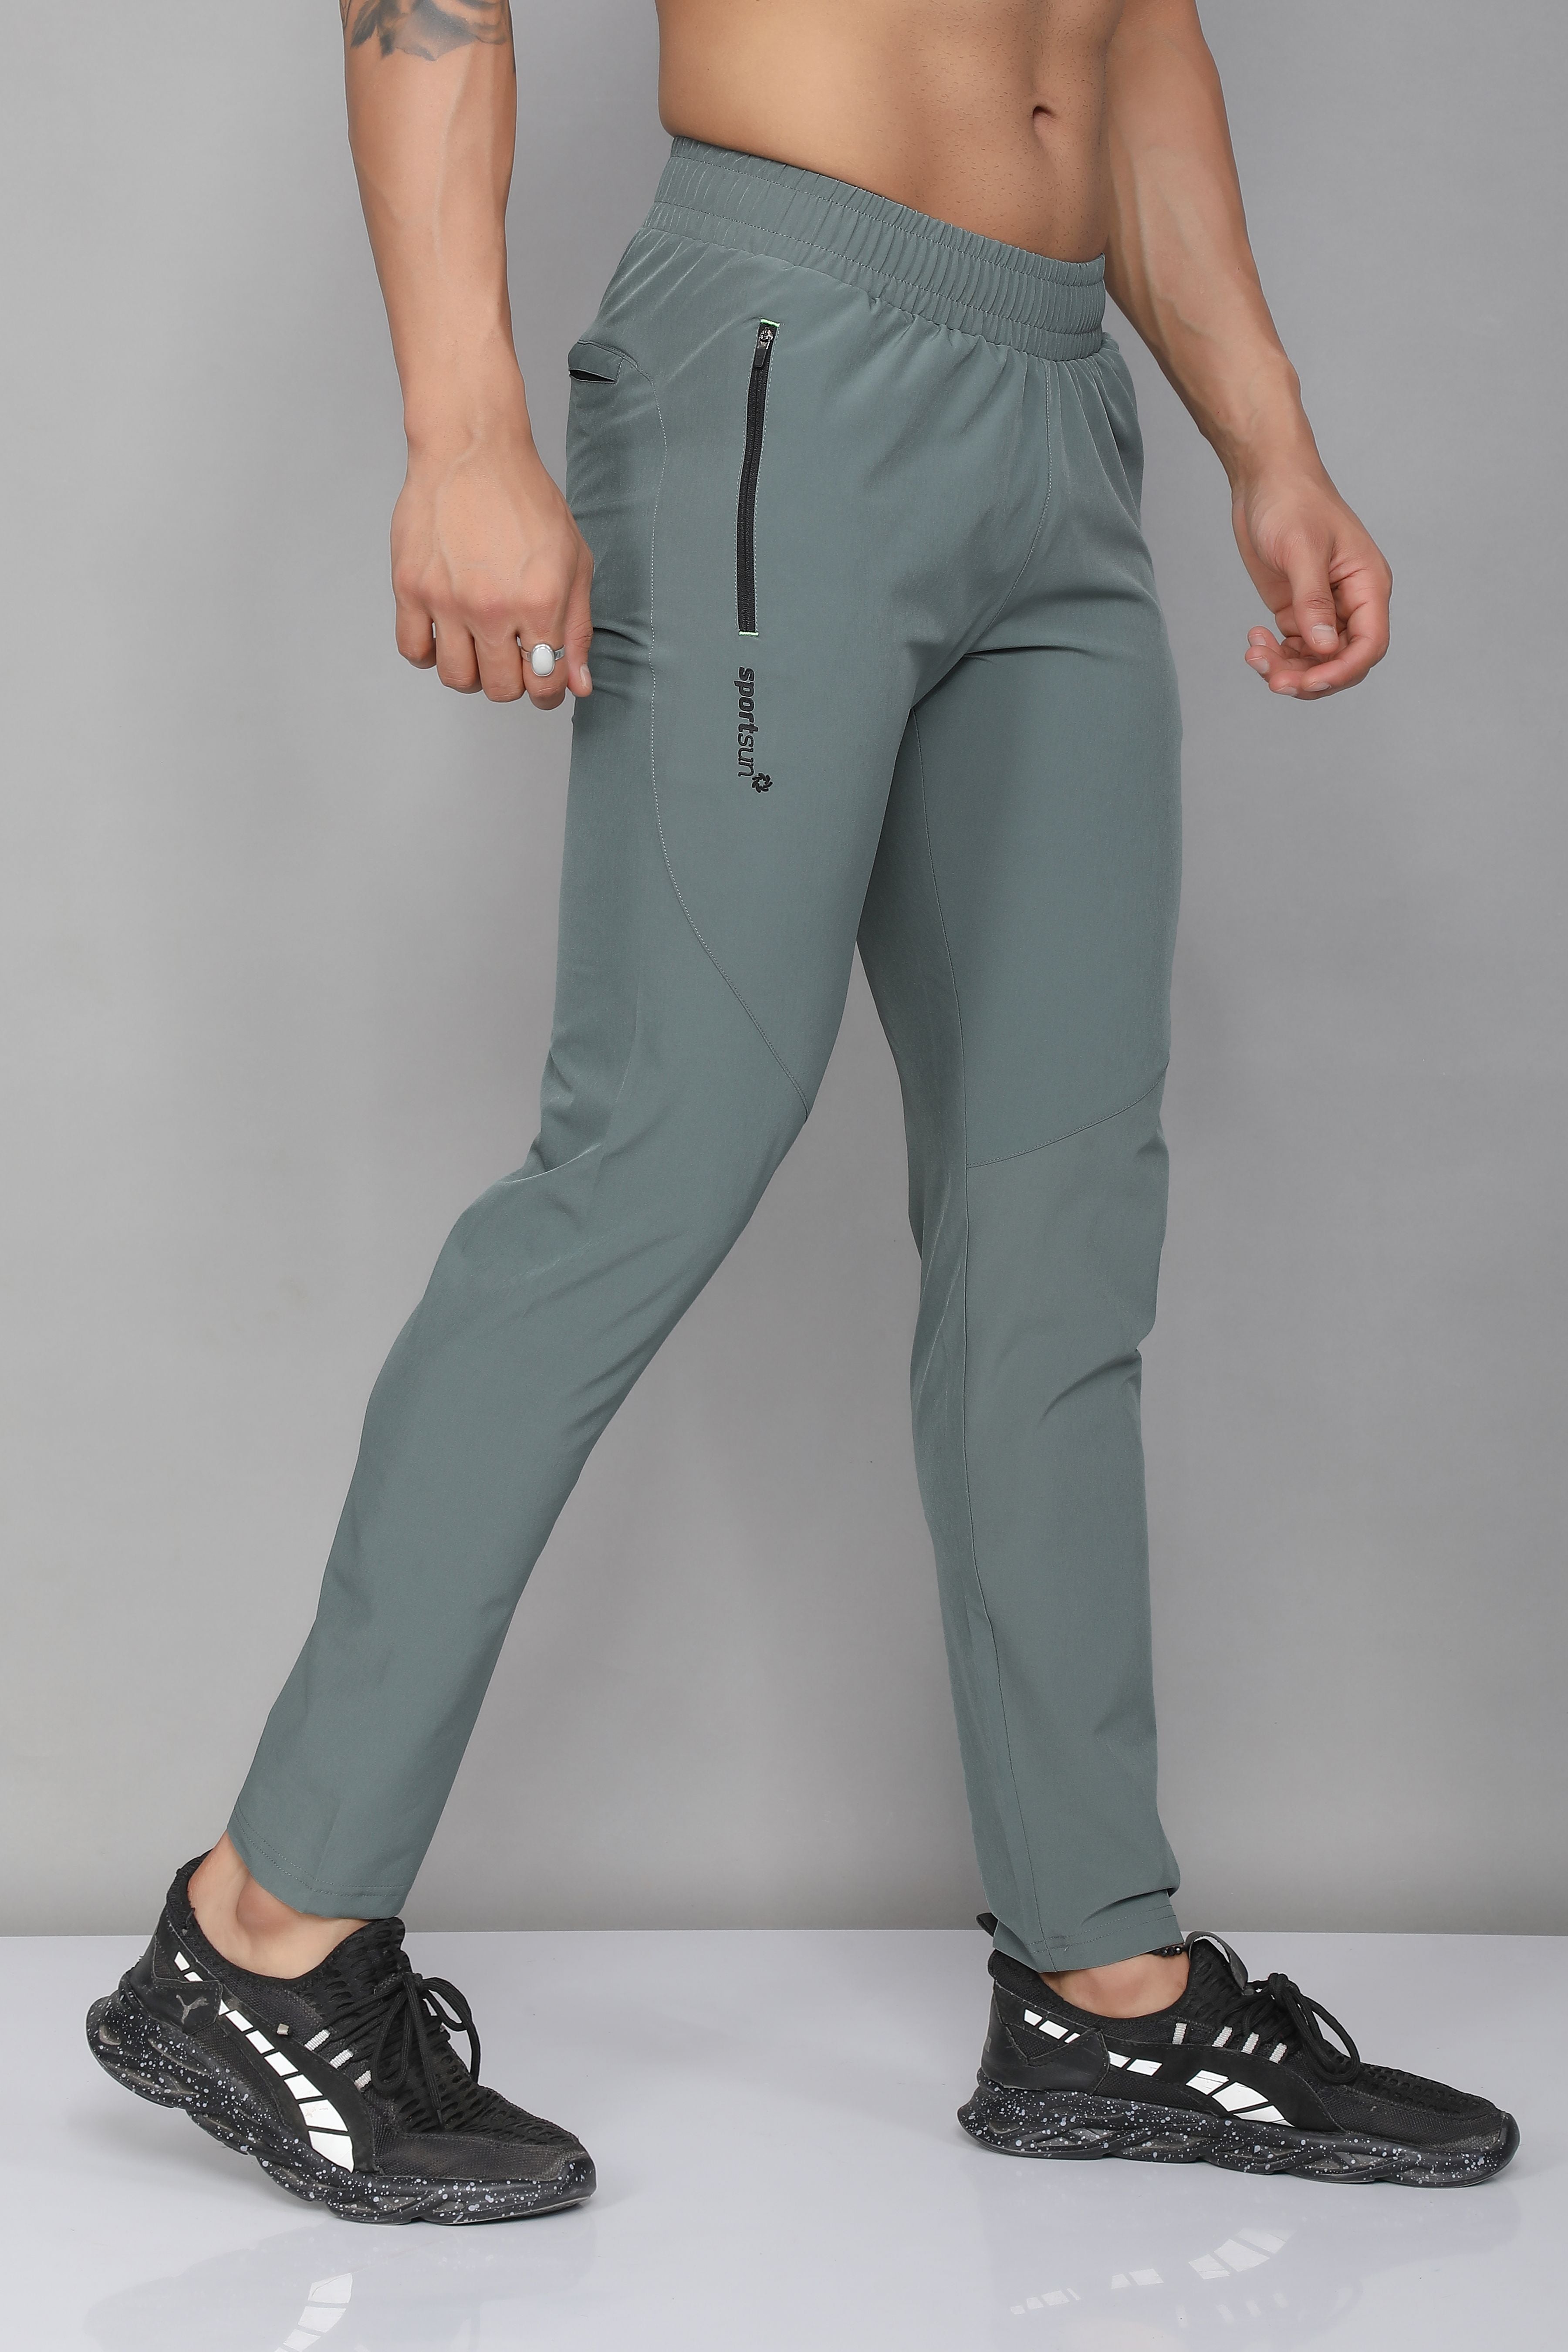 Buy online Grey Mid Rise Solid Track Pant from bottom wear for